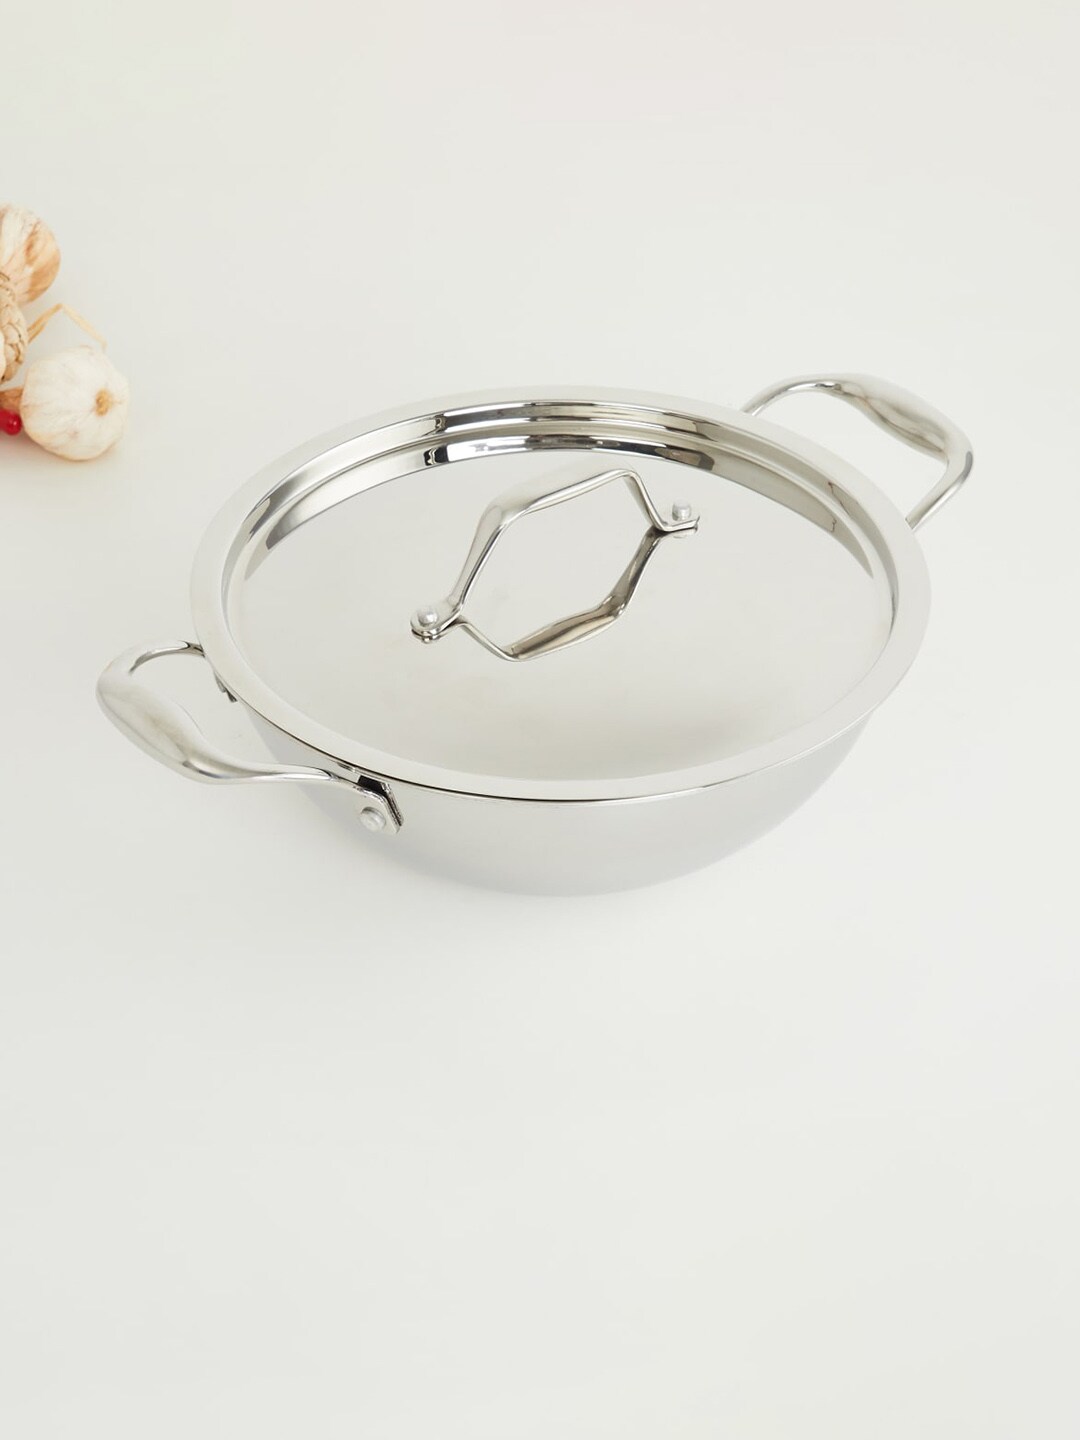 Home Centre Silver-Toned Solid Stainless Steel Kadhai With Lid Price in India